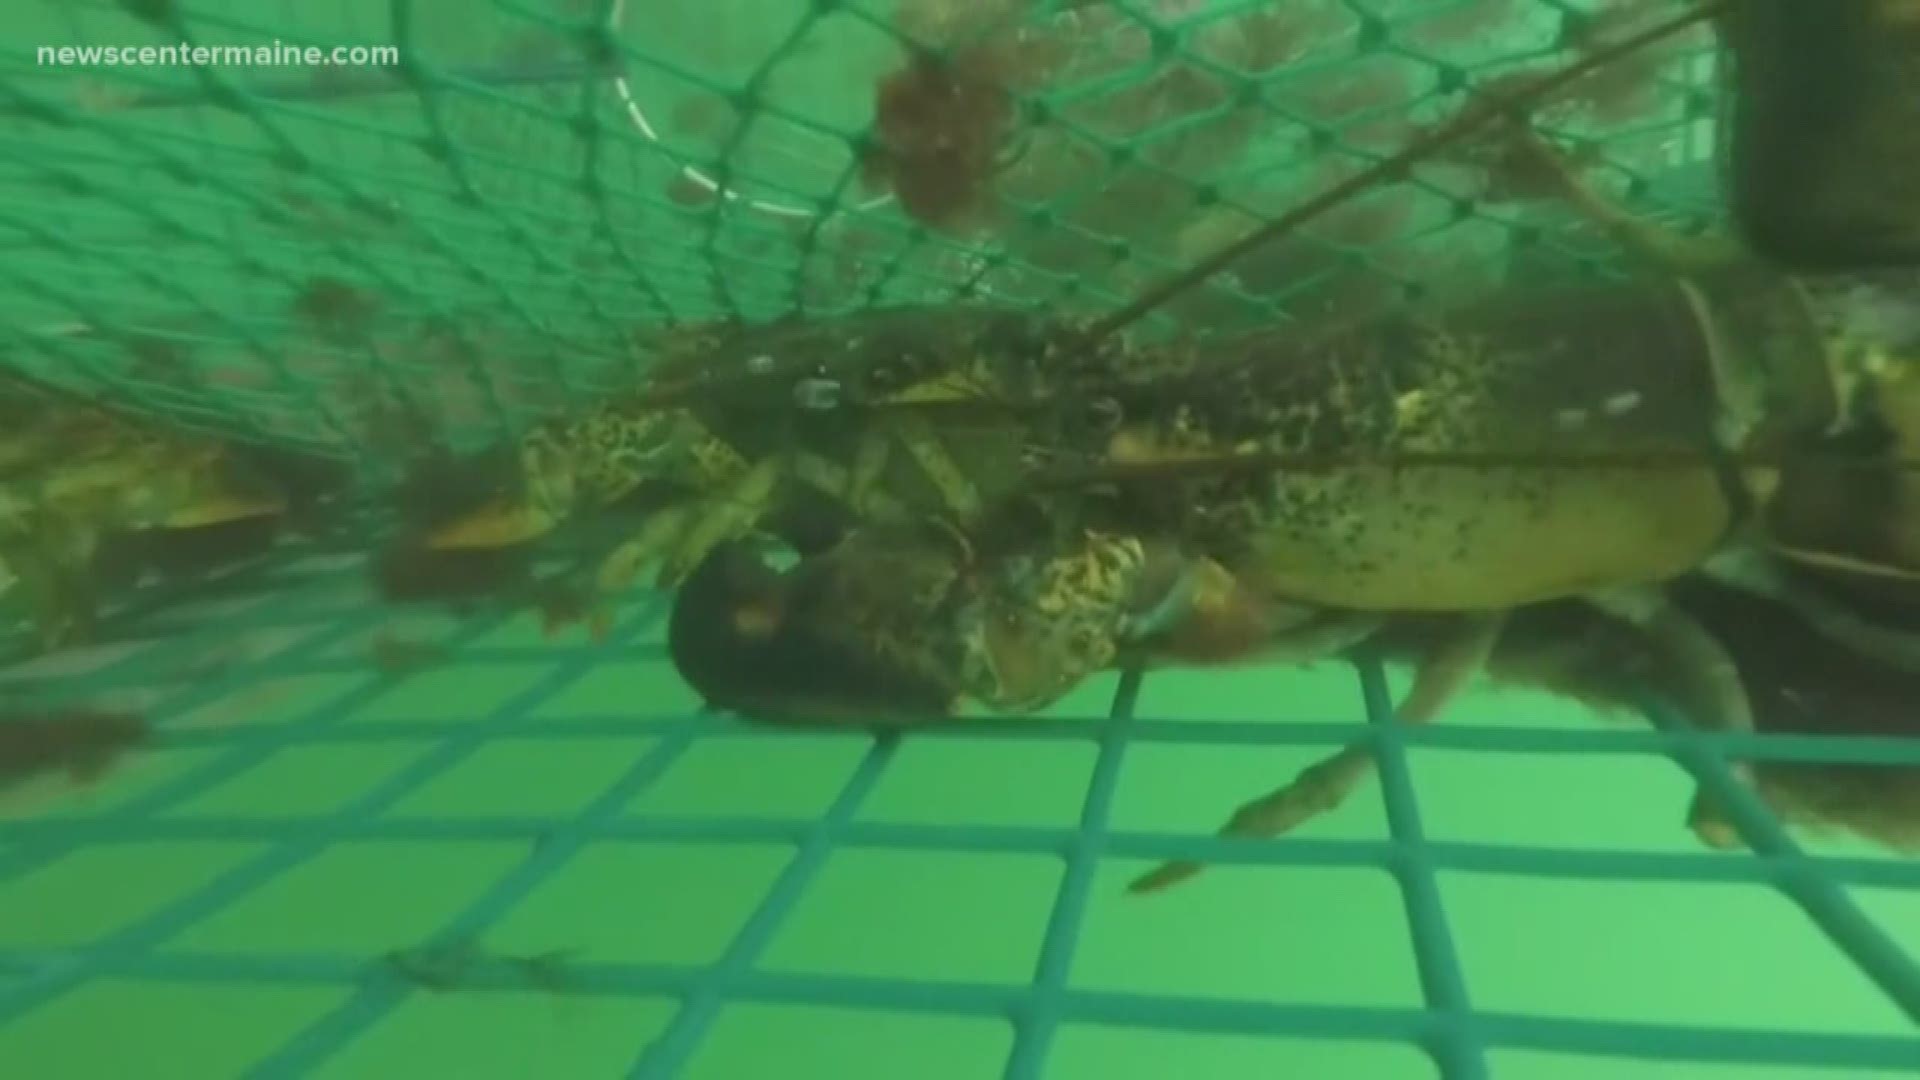 A Maine company is researching the idea of using lobster blood in preventative drugs.